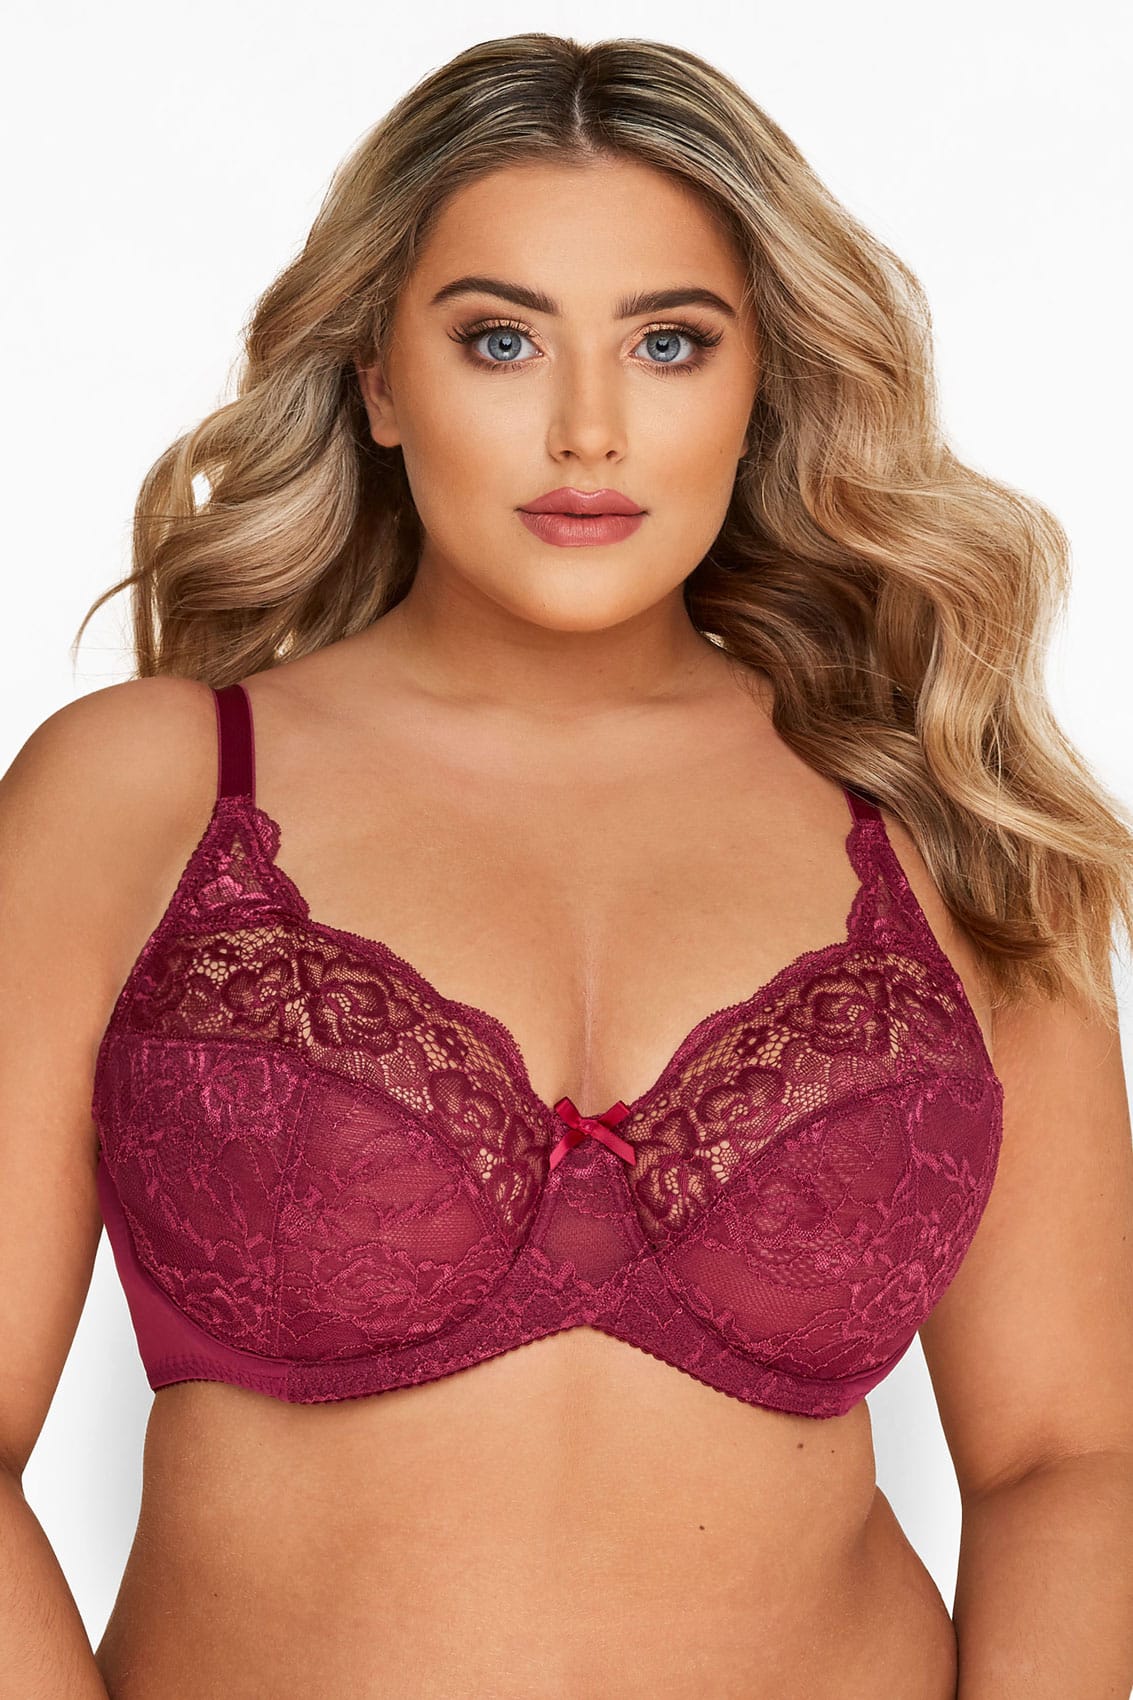 Berry Stretch Lace Non Padded Underwired Bra Sizes 38 40